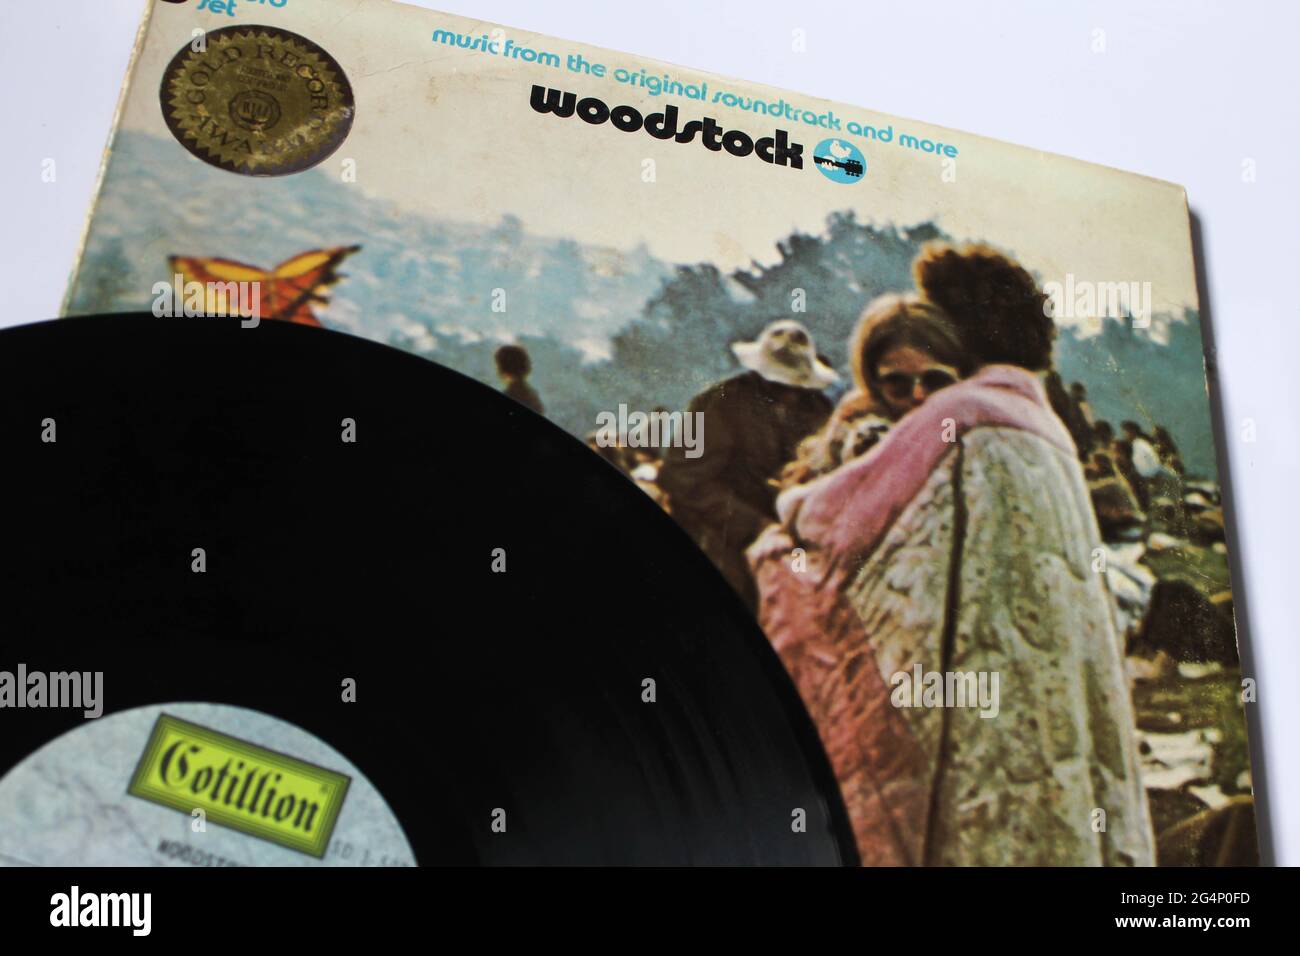 Music from the Original Soundtrack and More is a live album of selected performances from the 1969 Woodstock counterculture festival. album cover Stock Photo